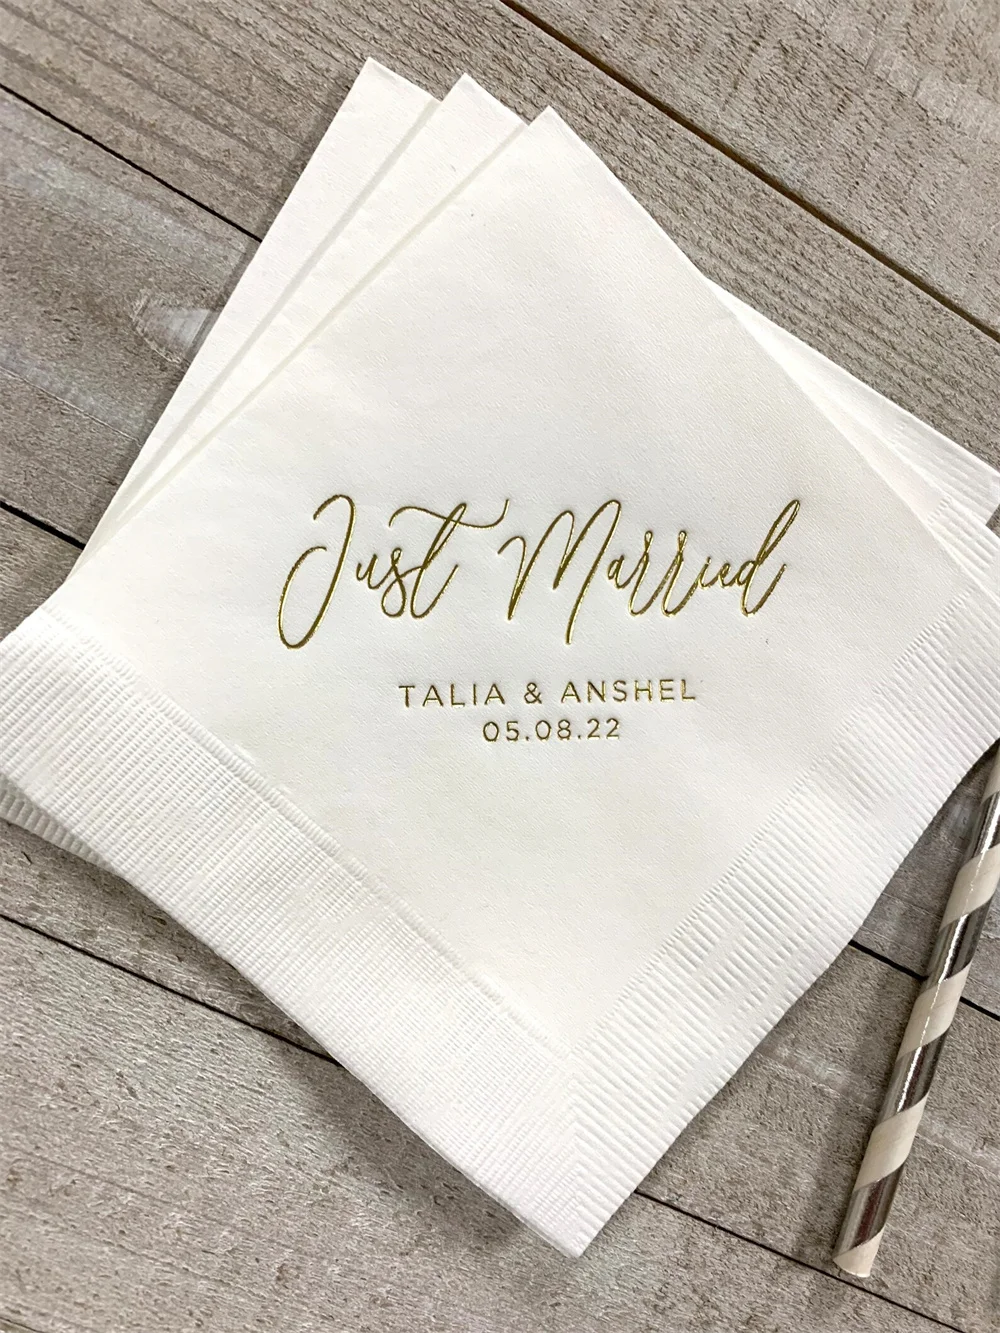 

50 Personalized Napkins Wedding Napkins Custom Monogram Just Married Beverage Cocktail Luncheon Dinner Guest Towels Available!